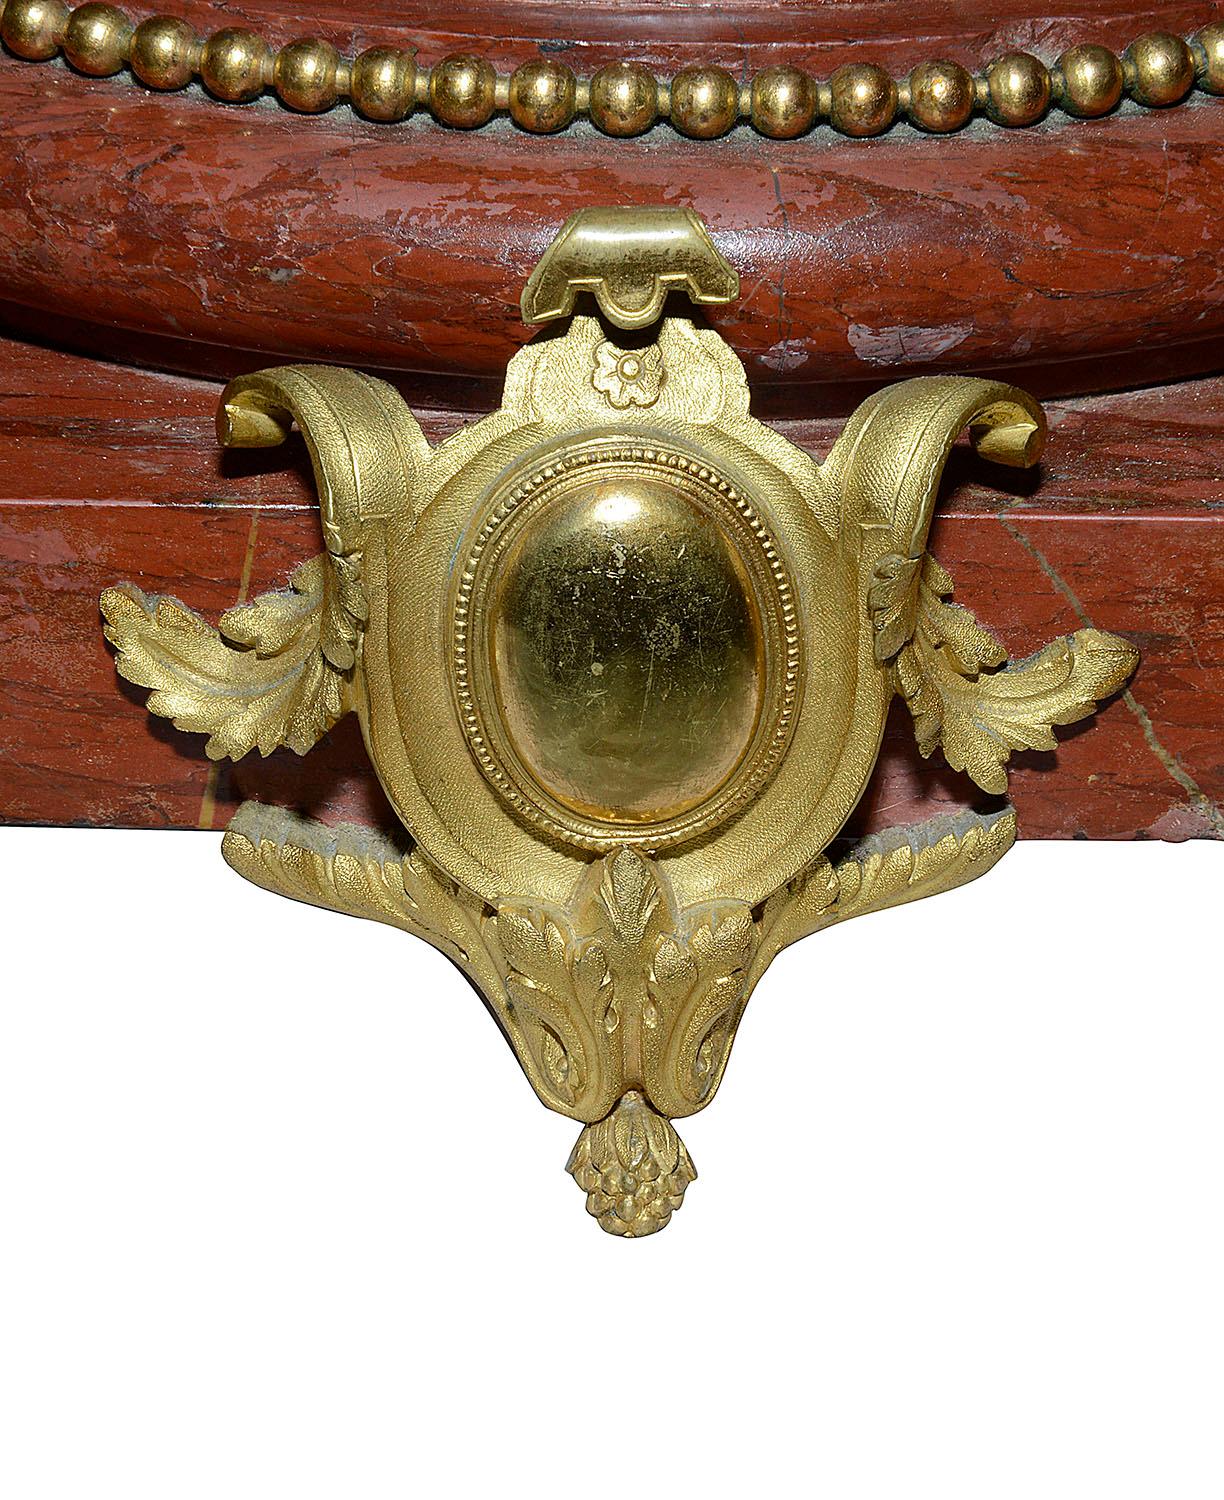 Large 19th Century Ormolu Globe Mantel Clock by Aug. Moreau In Good Condition For Sale In Brighton, Sussex